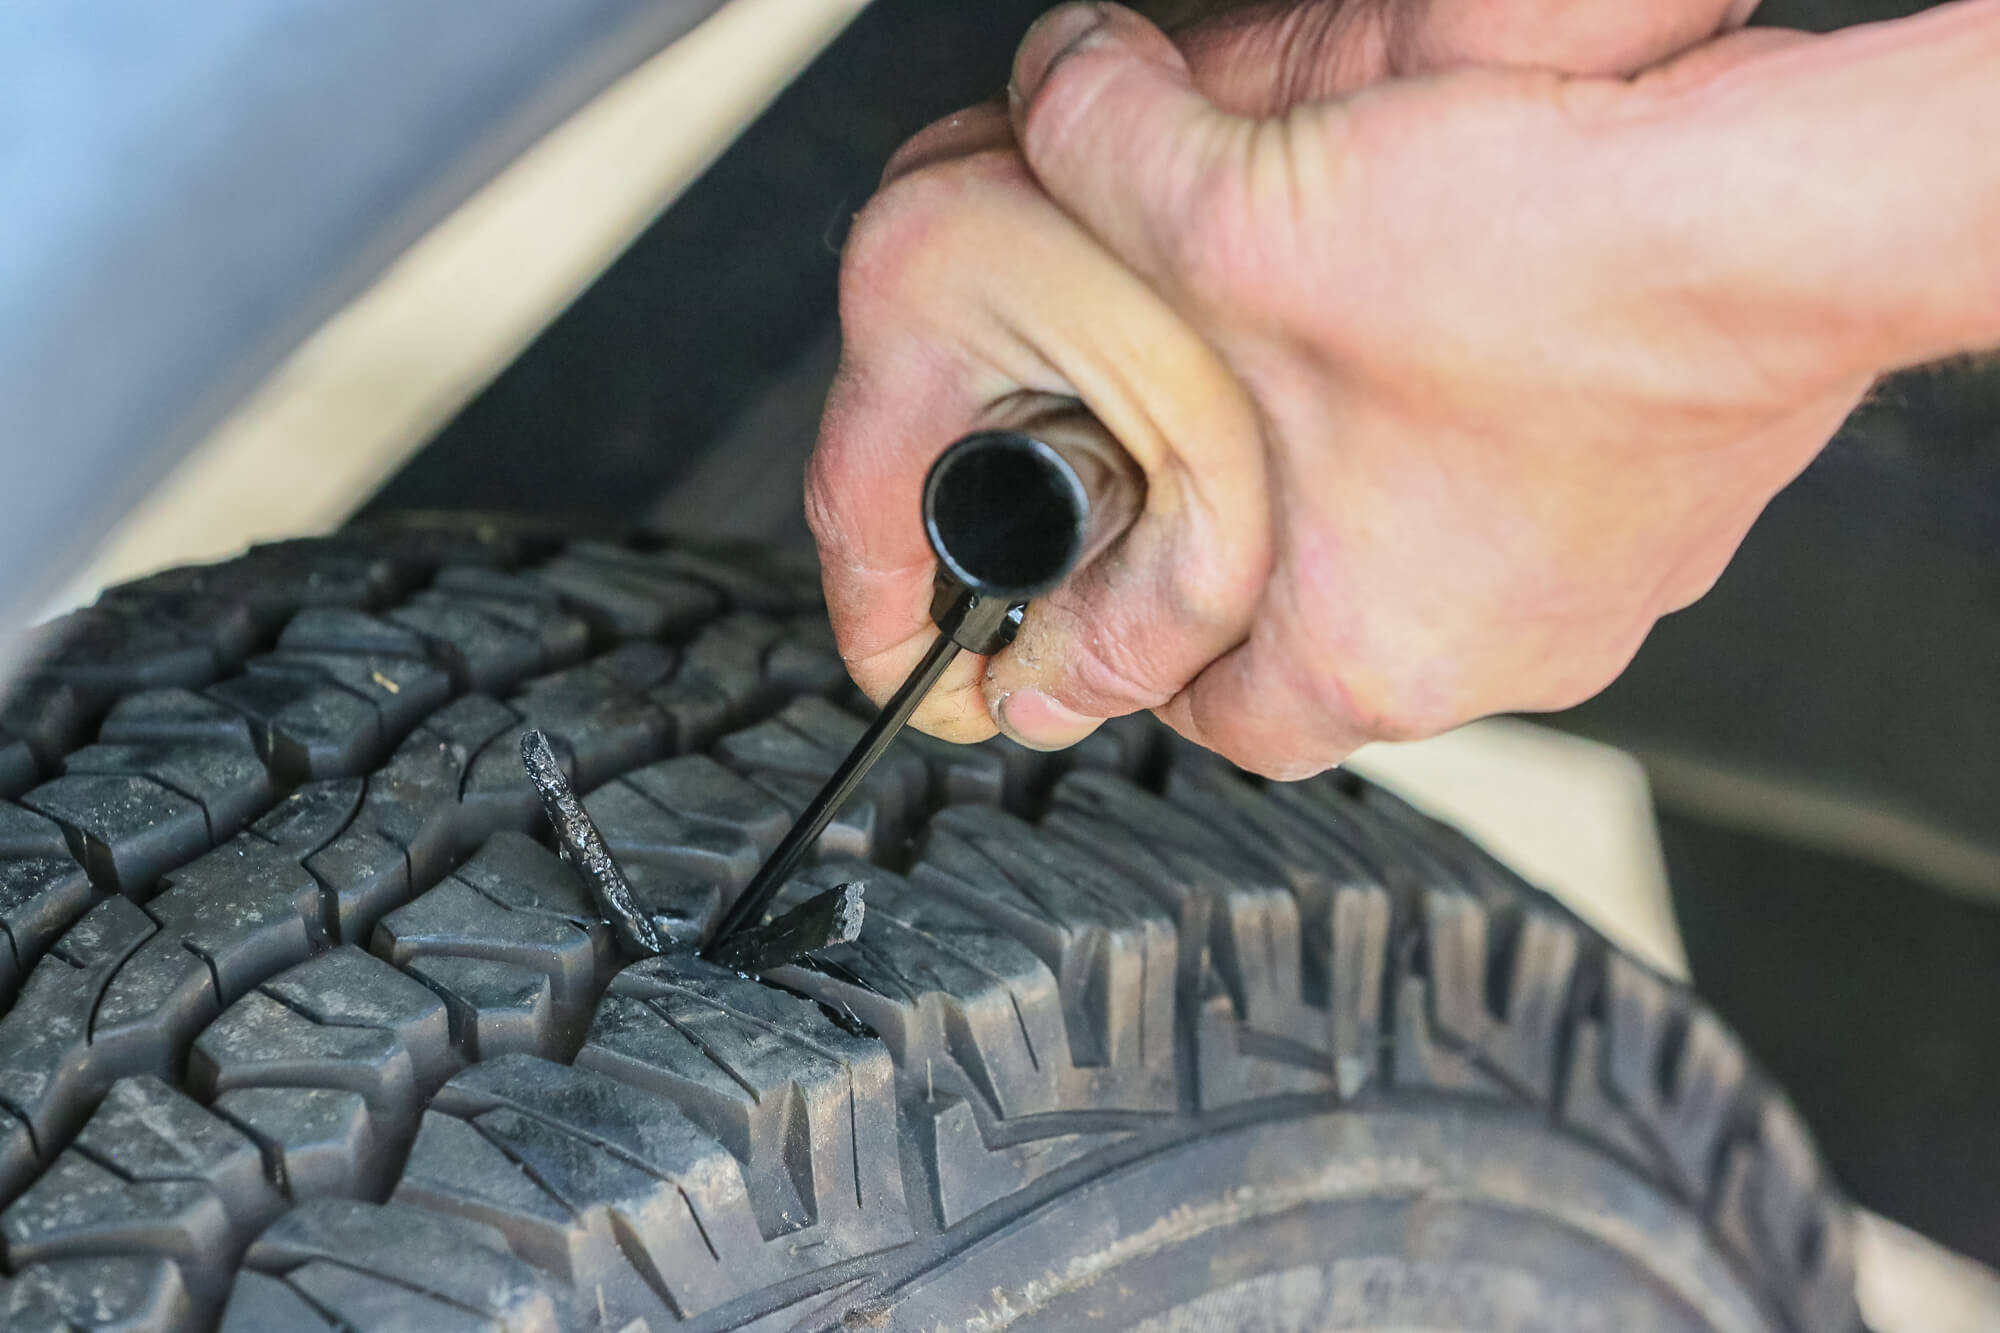 How To Plug A Tire - Best Guide to Plugging a Flat Tire